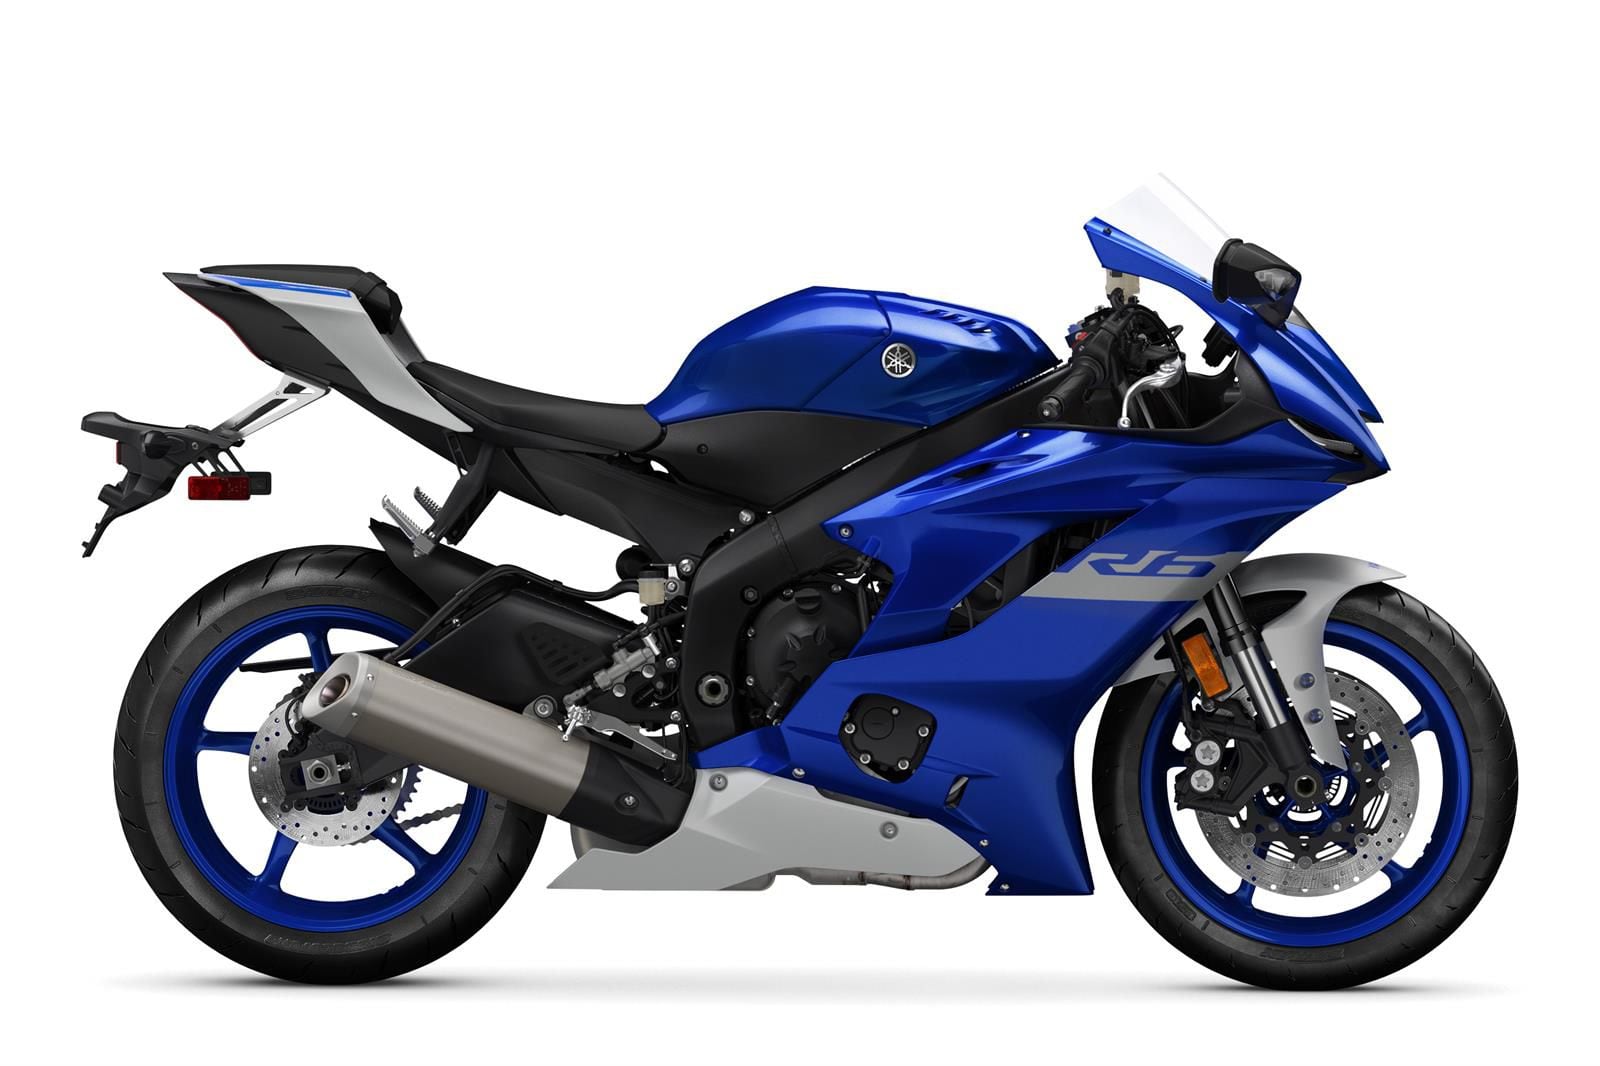 Yamaha YZF-R6 Buyer's Guide: Specs, Photos, Cycle World